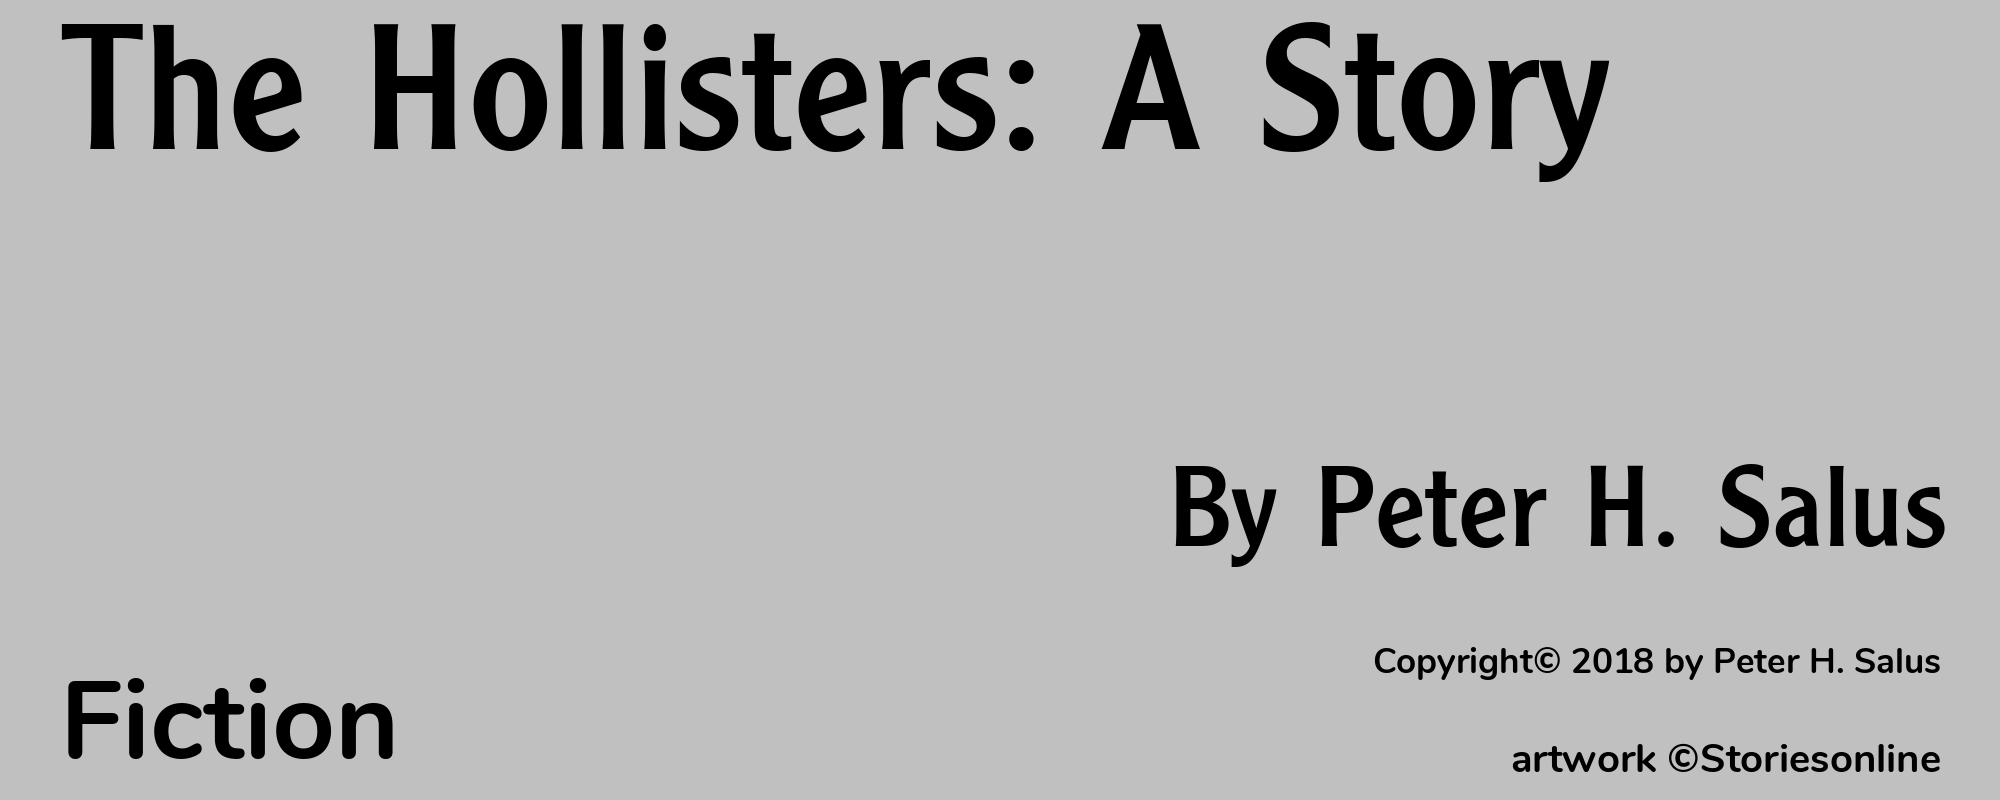 The Hollisters: A Story - Cover